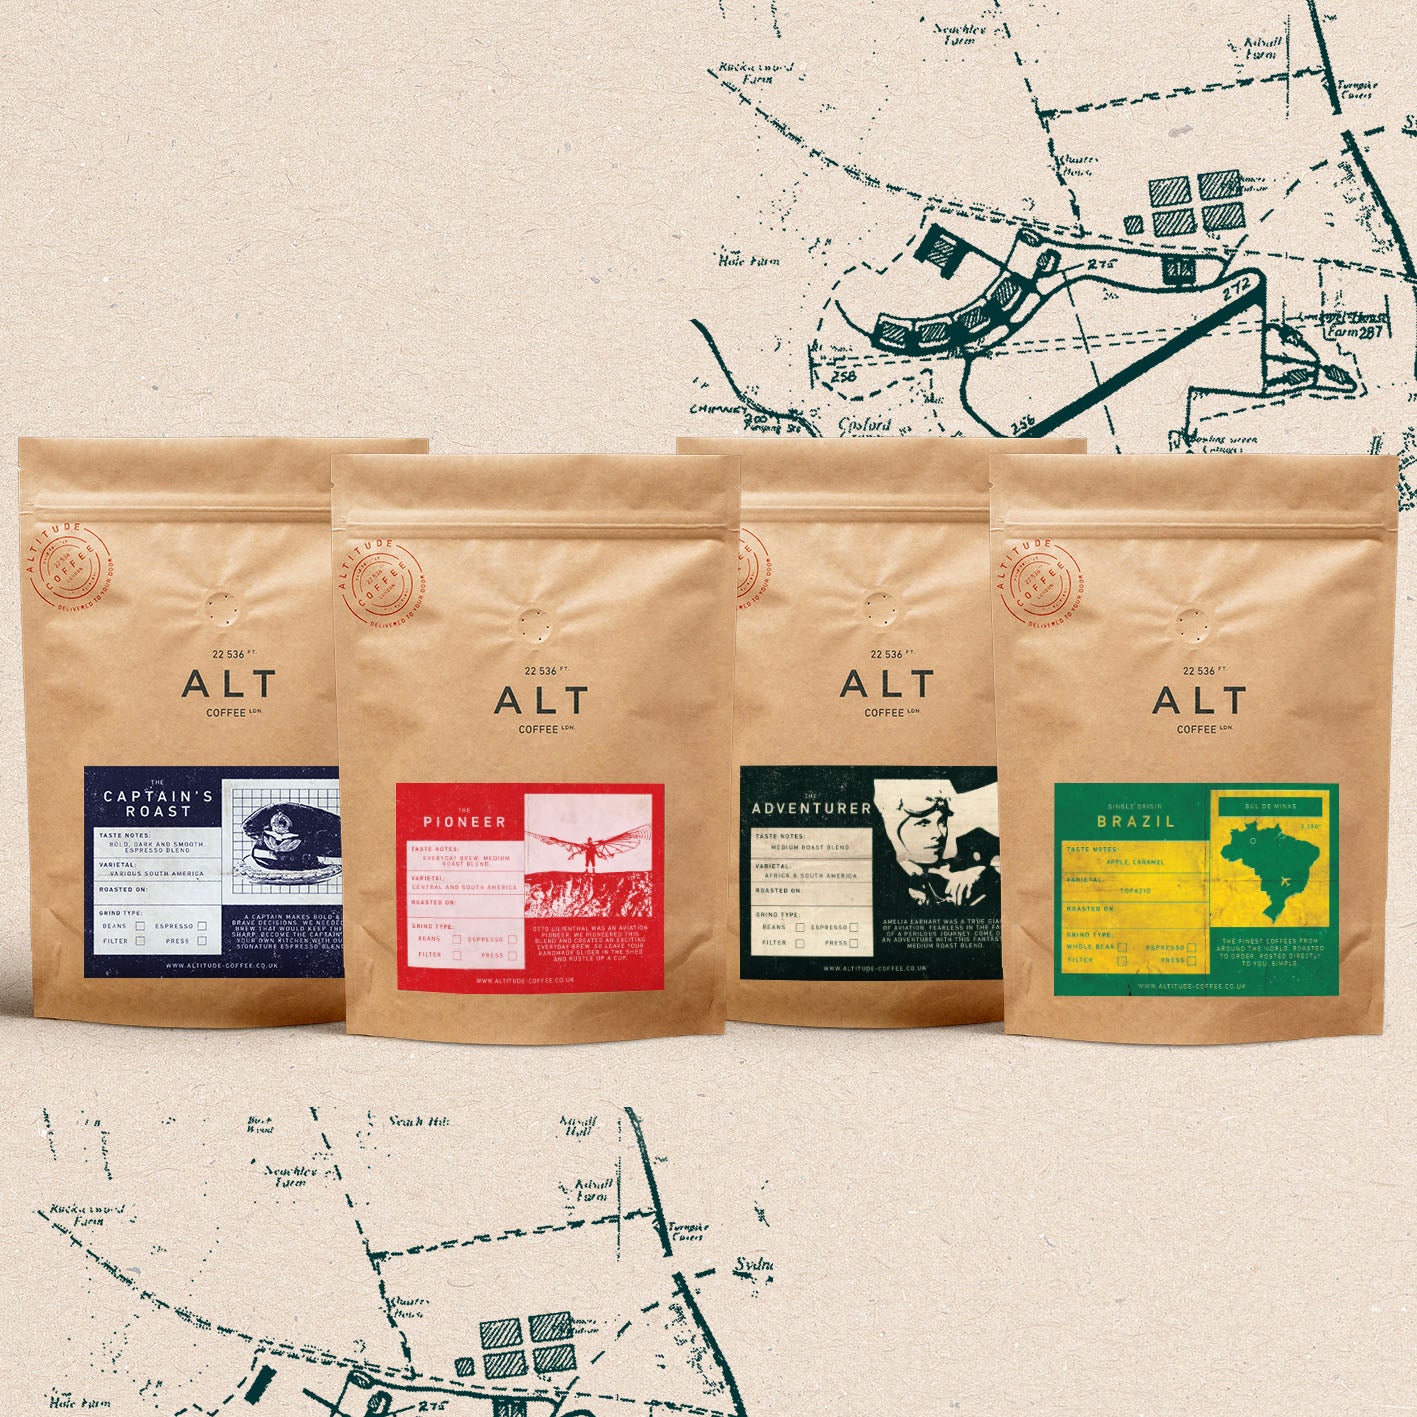 The Altitude Coffee Subscription